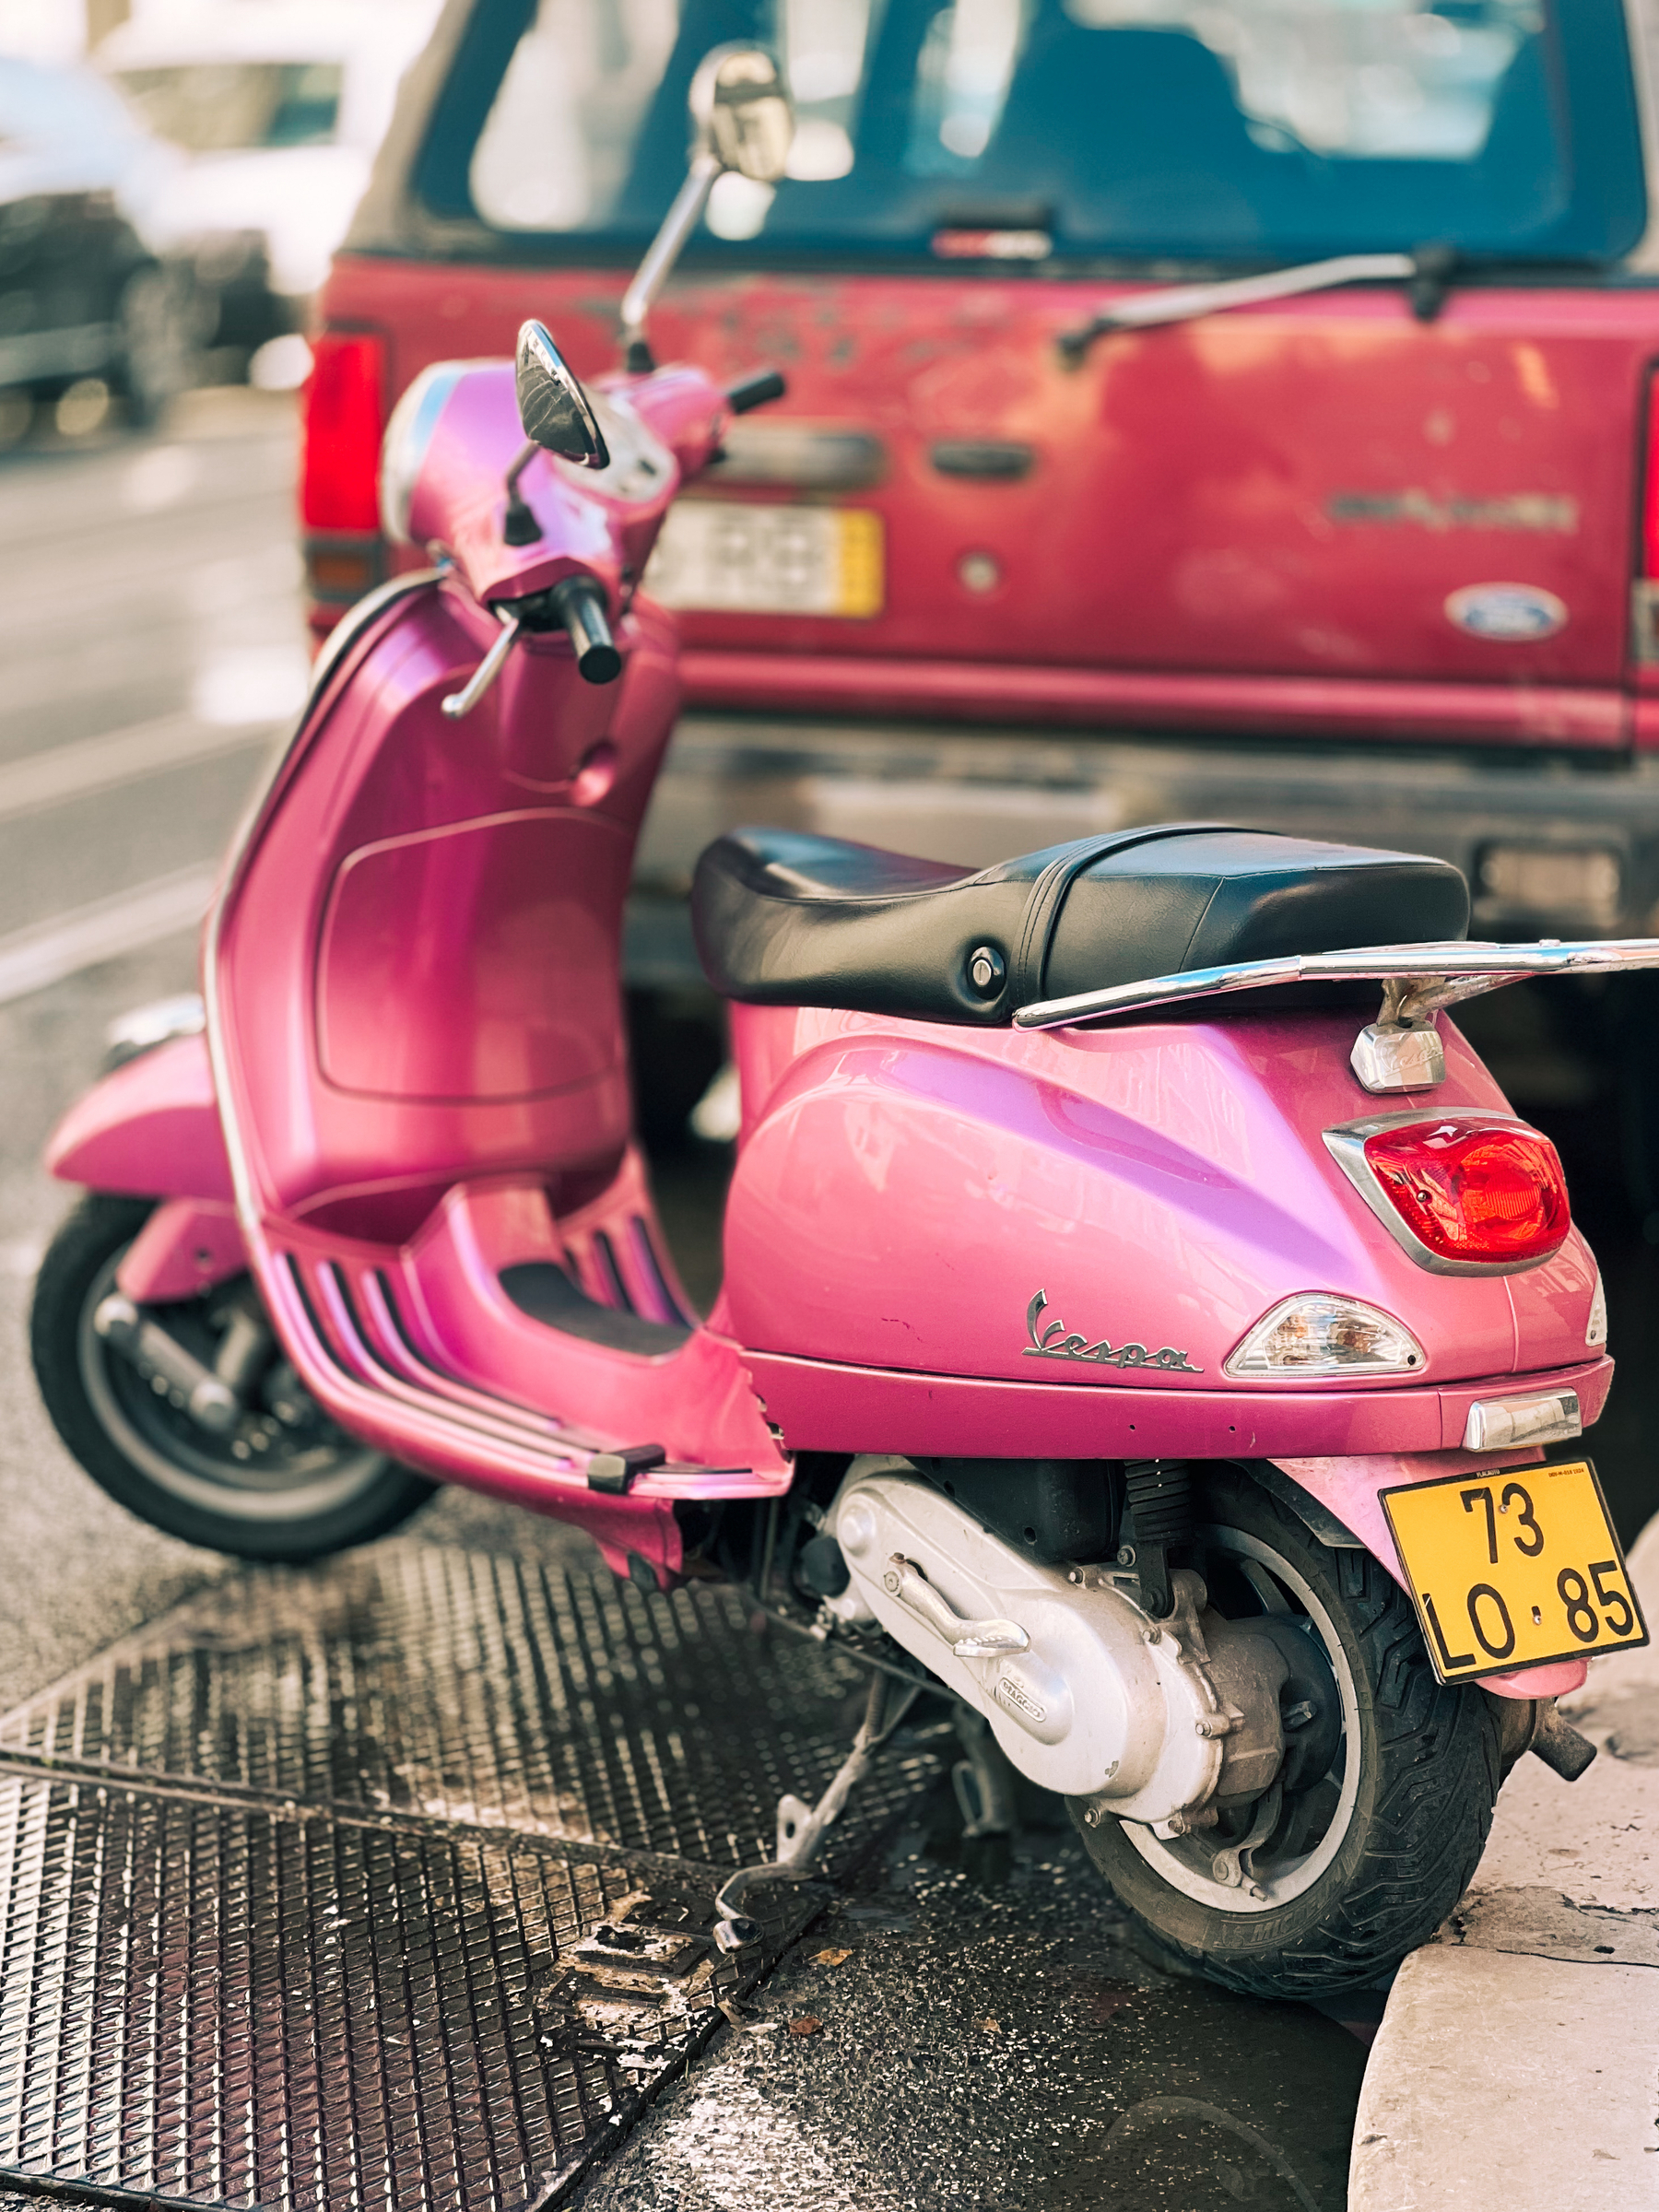 A pink scooter parked behind a red truck.